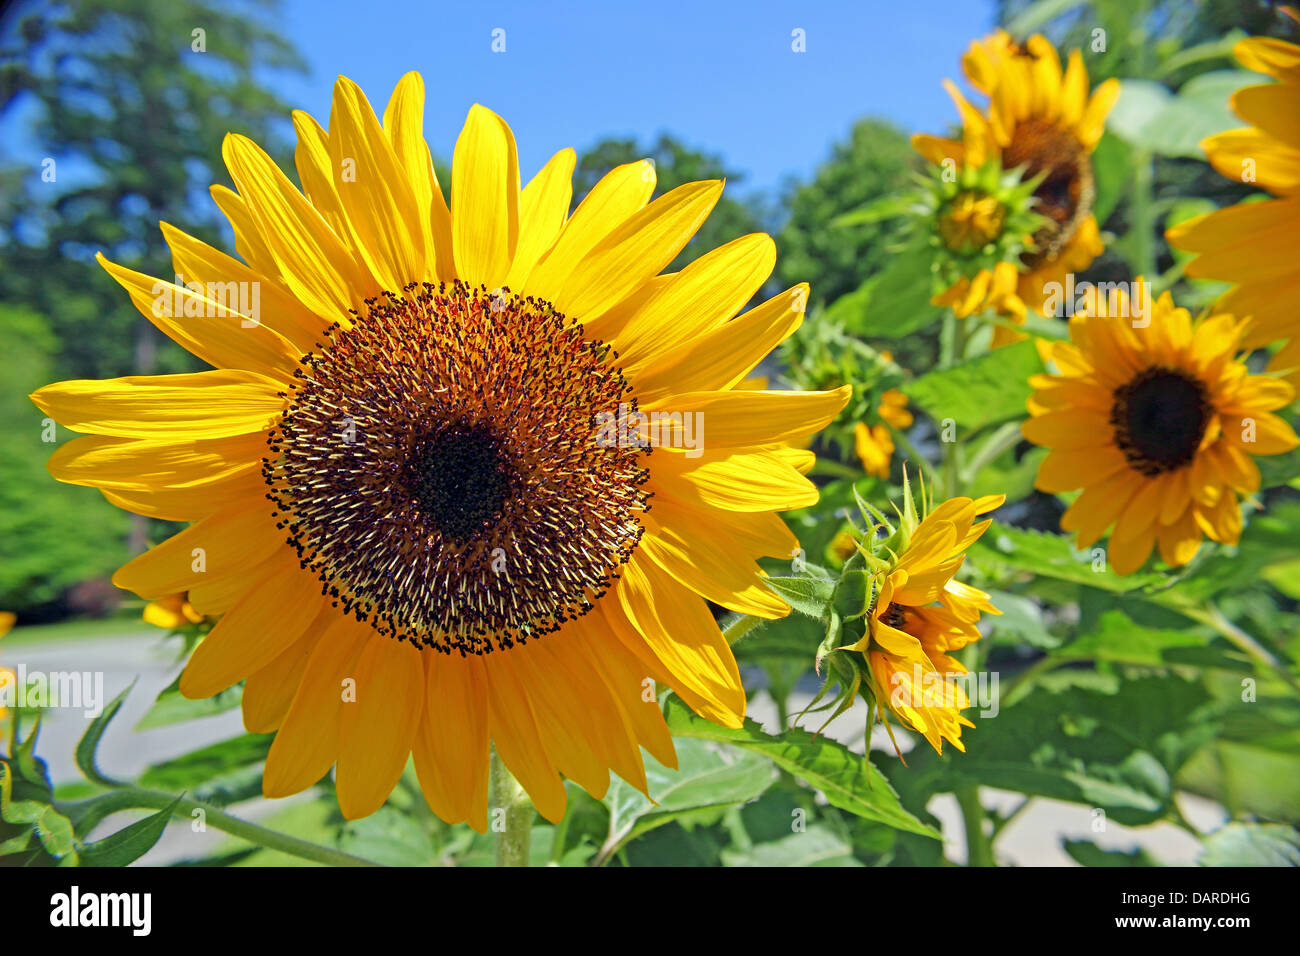 A stand of golden sunflowers in a garden. Stock Photo